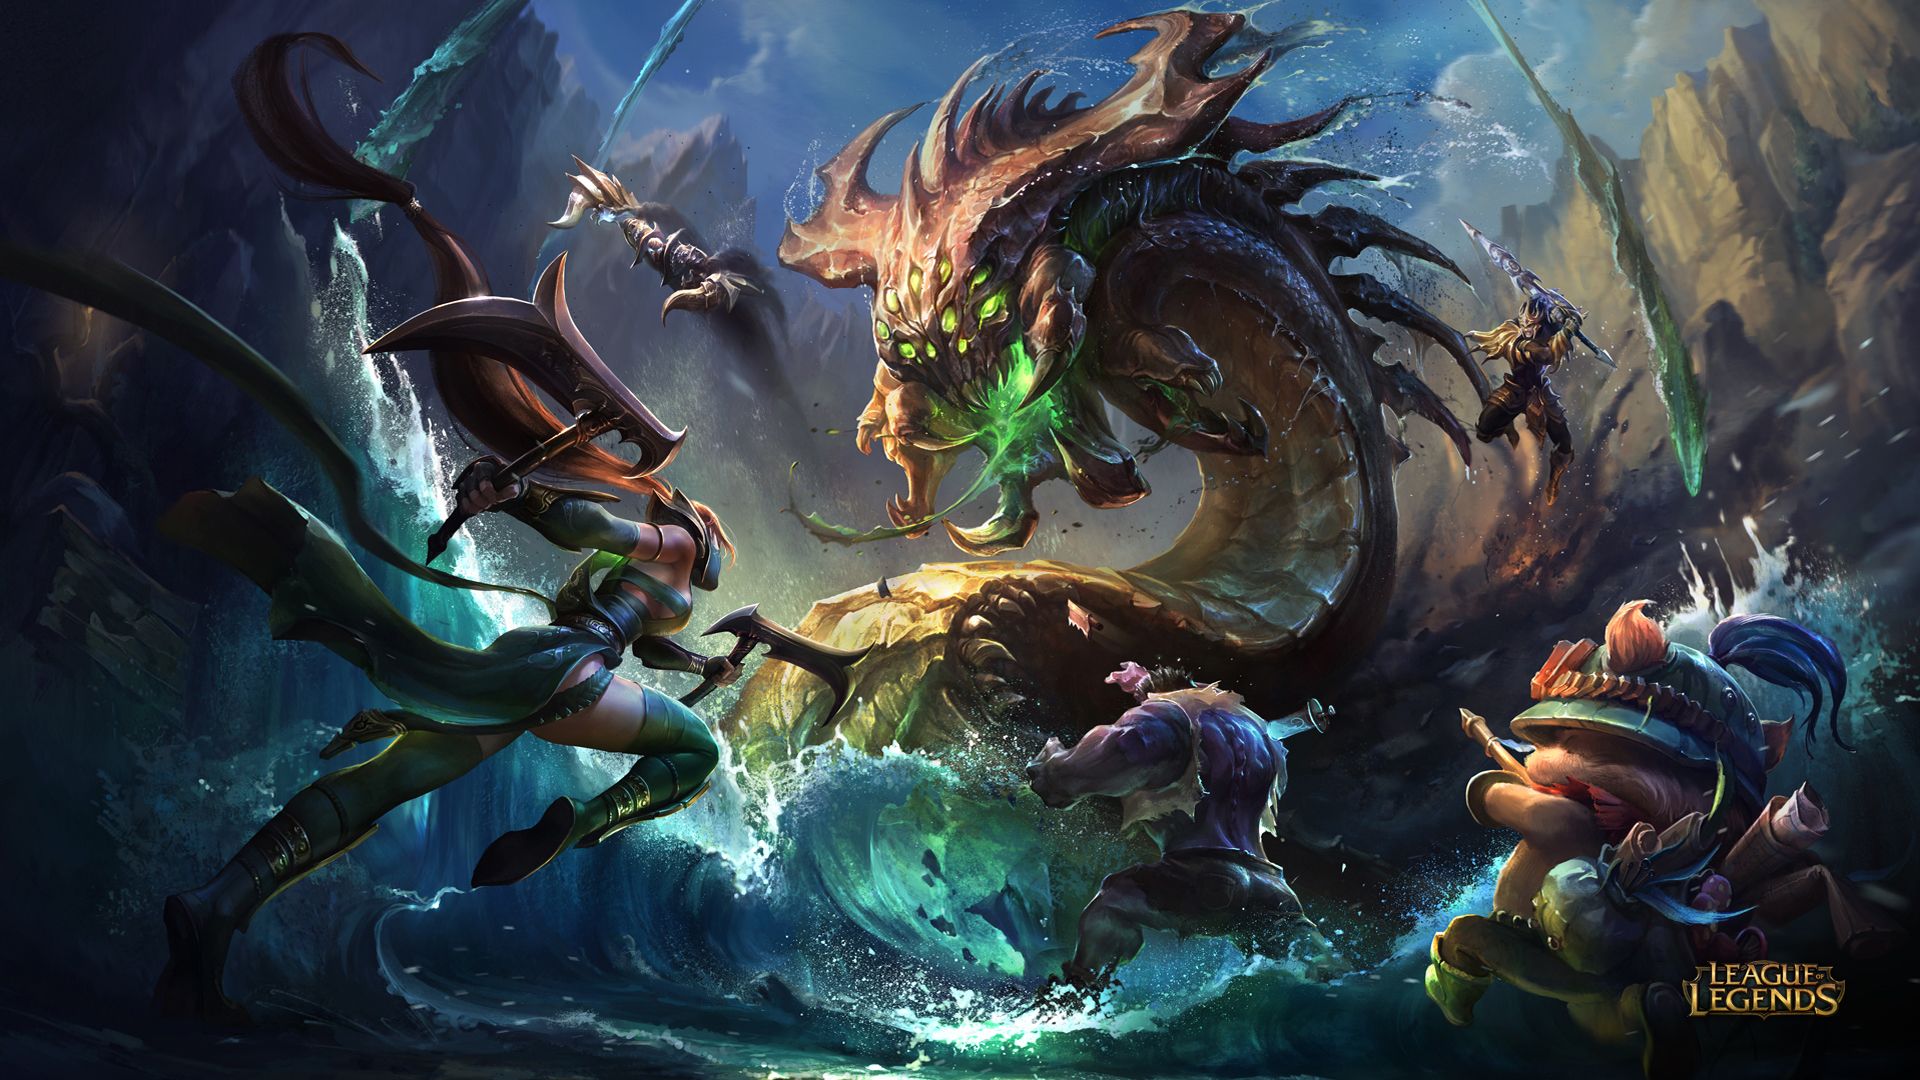 League of Legends Terms and Glossary Is Useful to Understand this Image of Champions Fighting a Monster in LoL